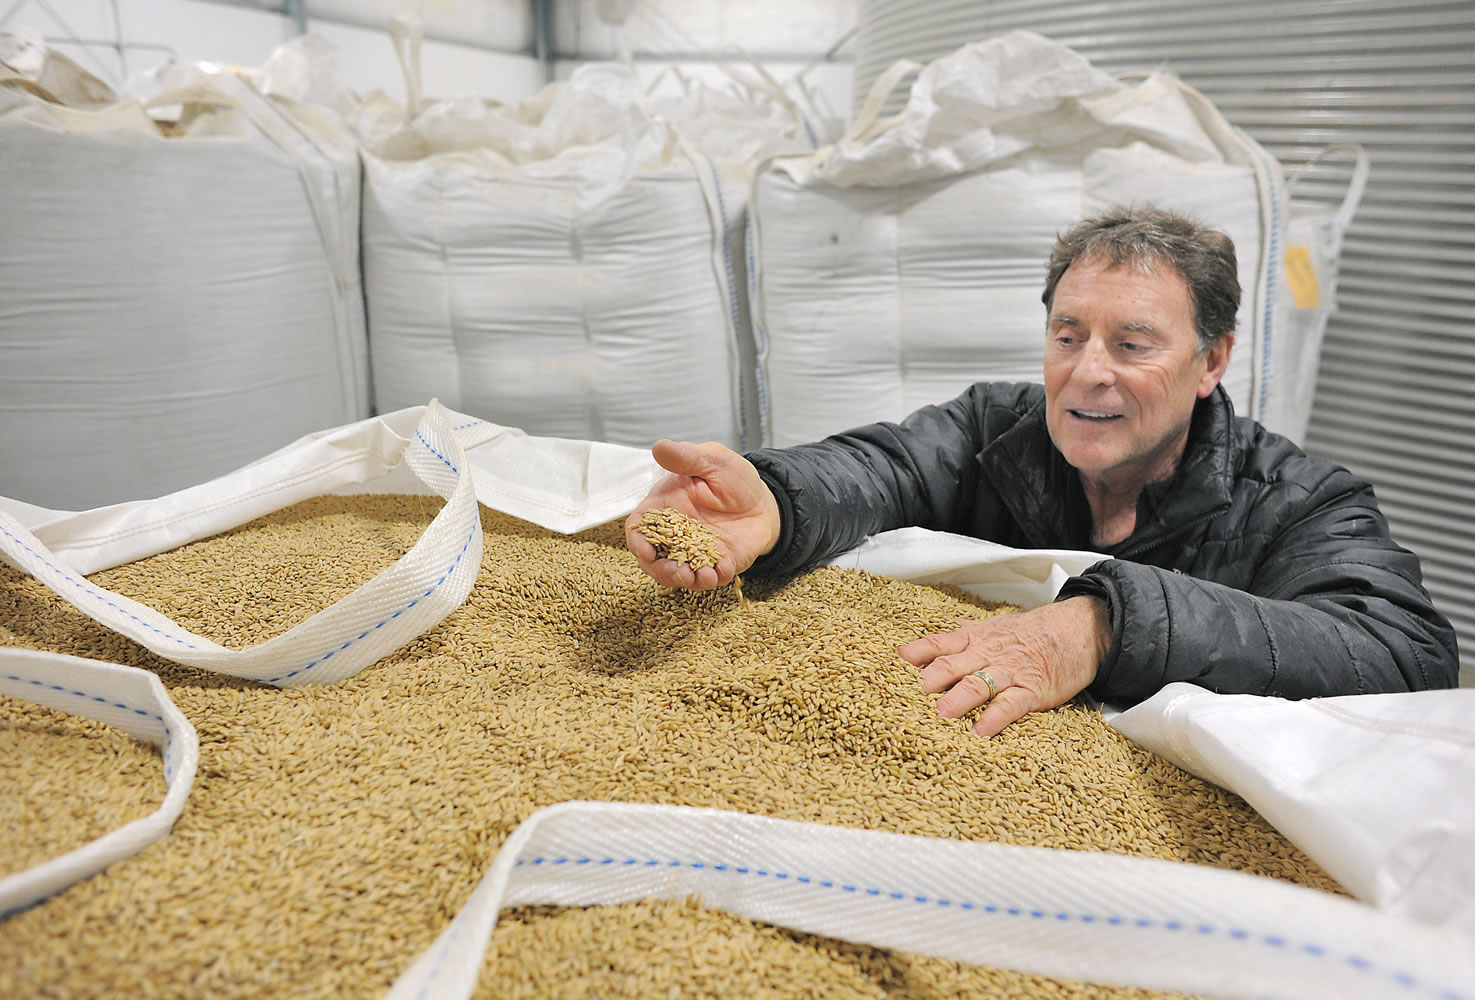 Skagit Valley Malting founder Wayne Carpenter checks out barley Dec 10 in Burlington, part of the summer&#039;s crop from Skagit Valley farmer Kraig Knutzen. Originally conceived in collaboration with the Port of Skagit to increase the value of local grain, Skagit Valley Malting is malting and germinating grains no one else can.